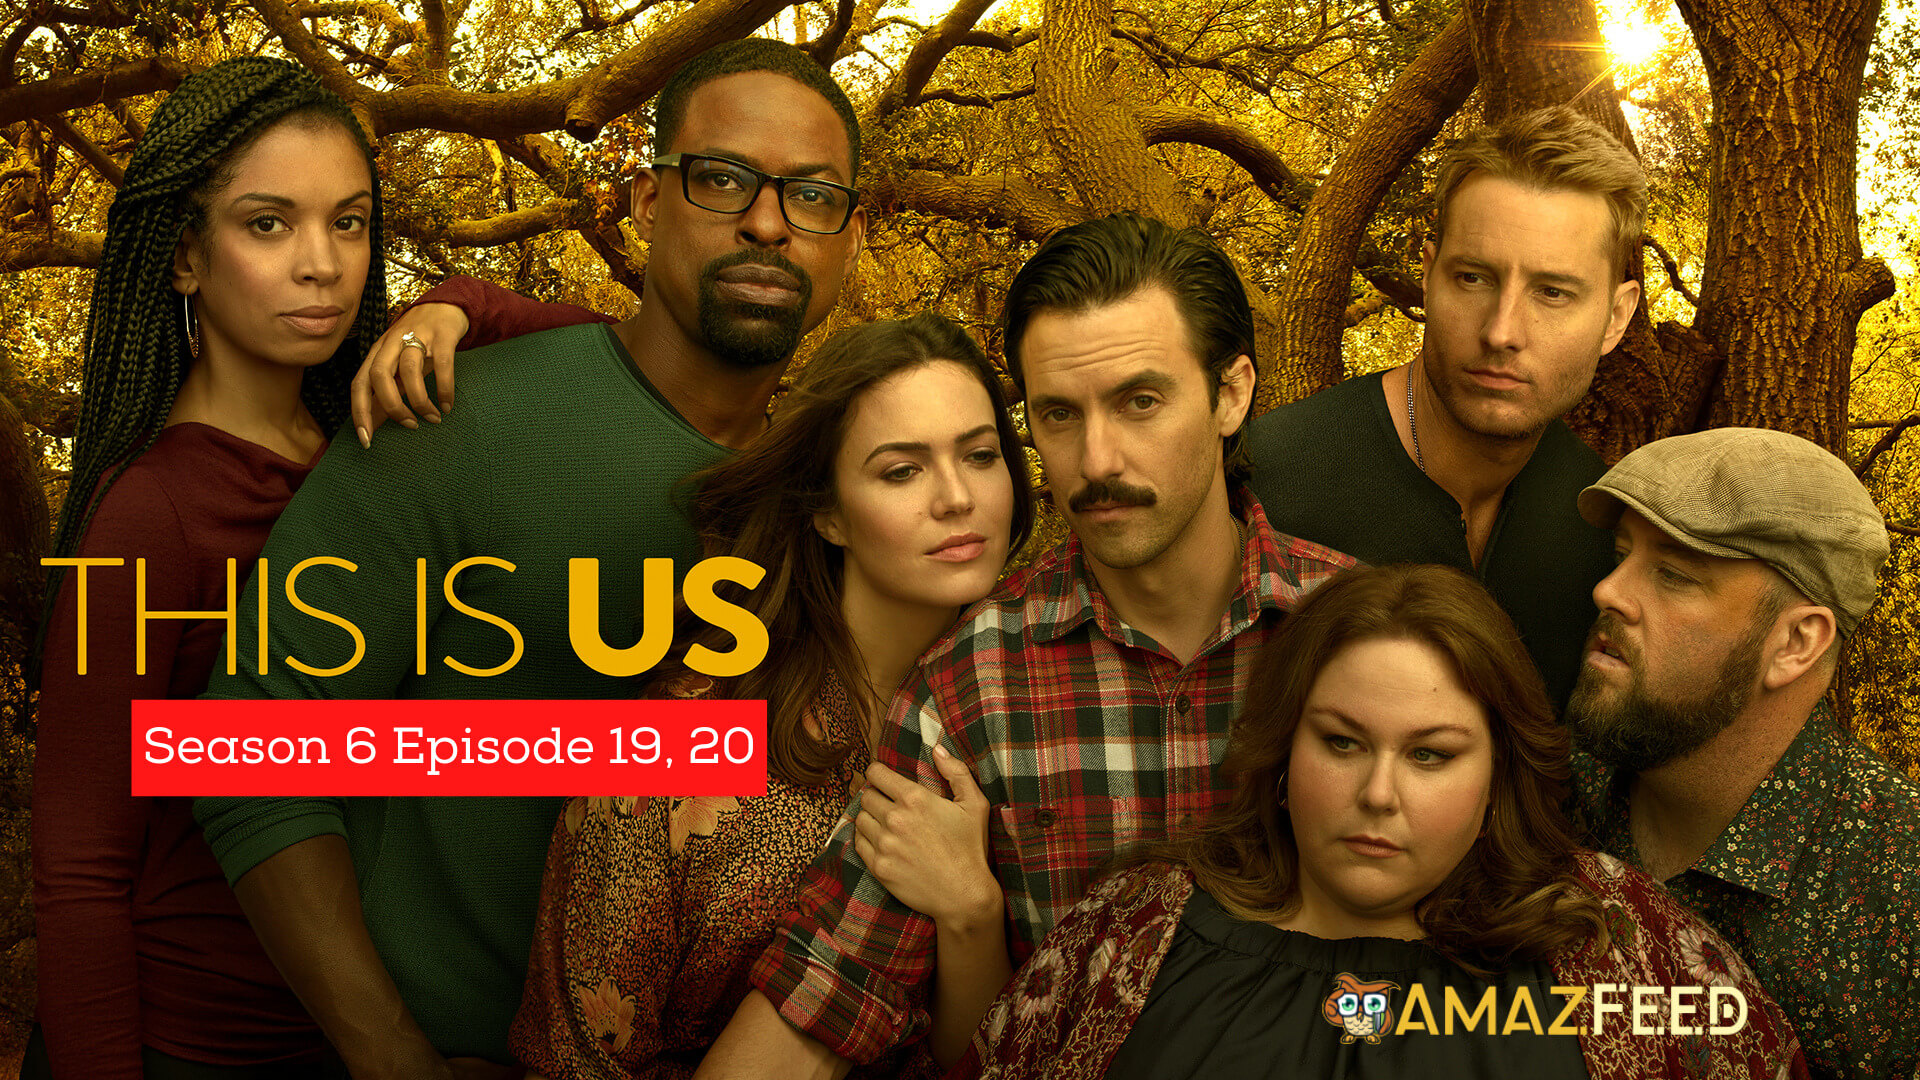 This Is Us Season 6 Episode 19, 20 Release Date